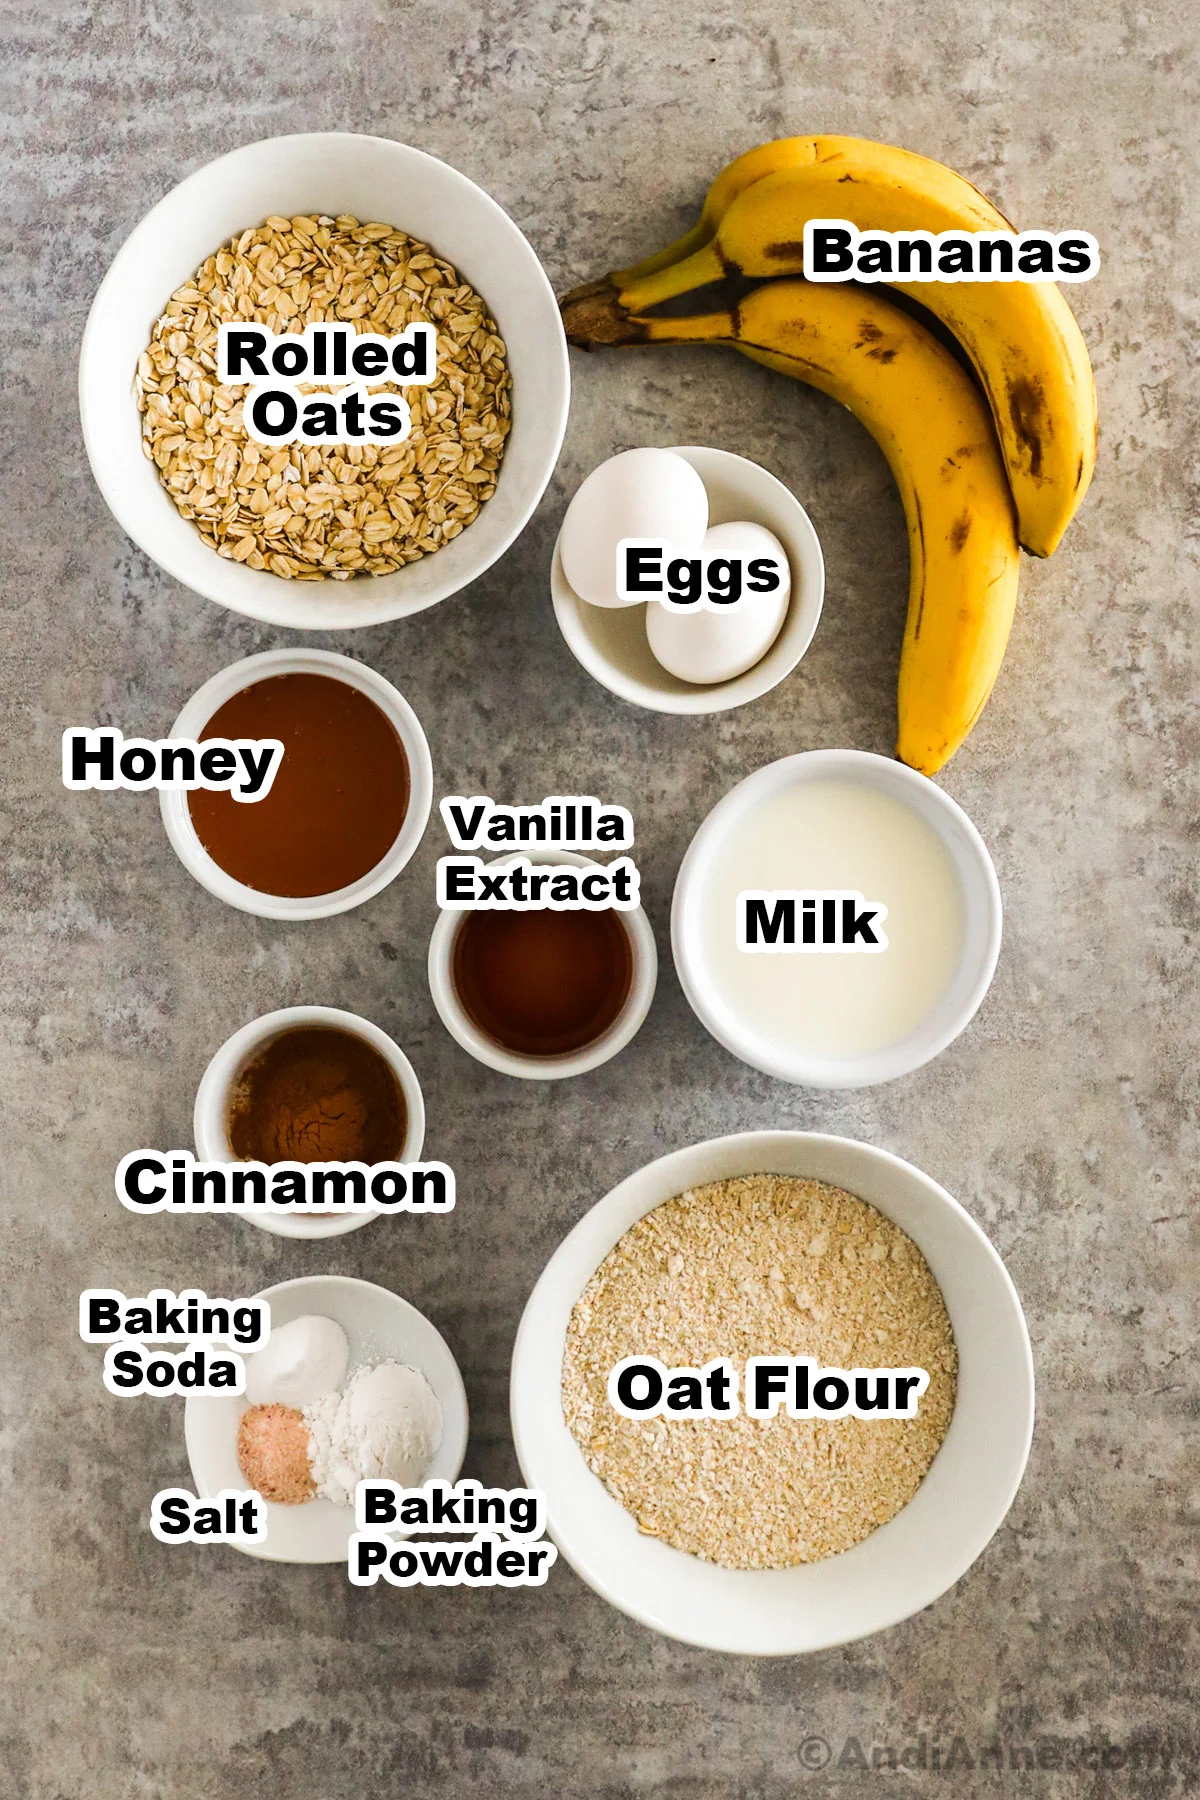 Overhead view of muffin ingredients in white bowls: Rolled oats, bananas, eggs, honey, vanilla extract, milk, cinnamon, baking soda, salt, baking powder and oat flour. 